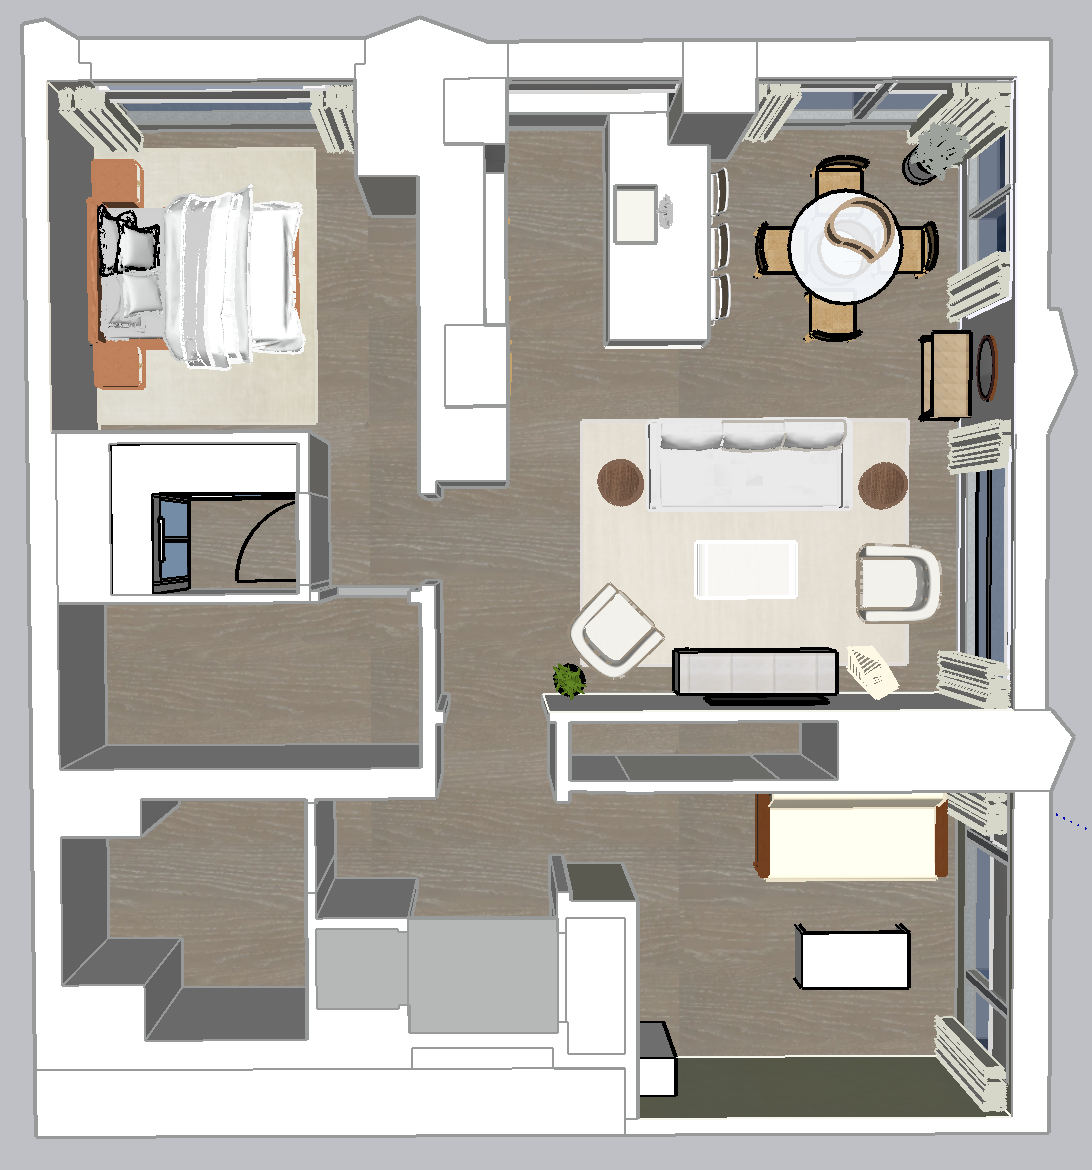 Revised Floor Plan with Furniture and Fixtures Included